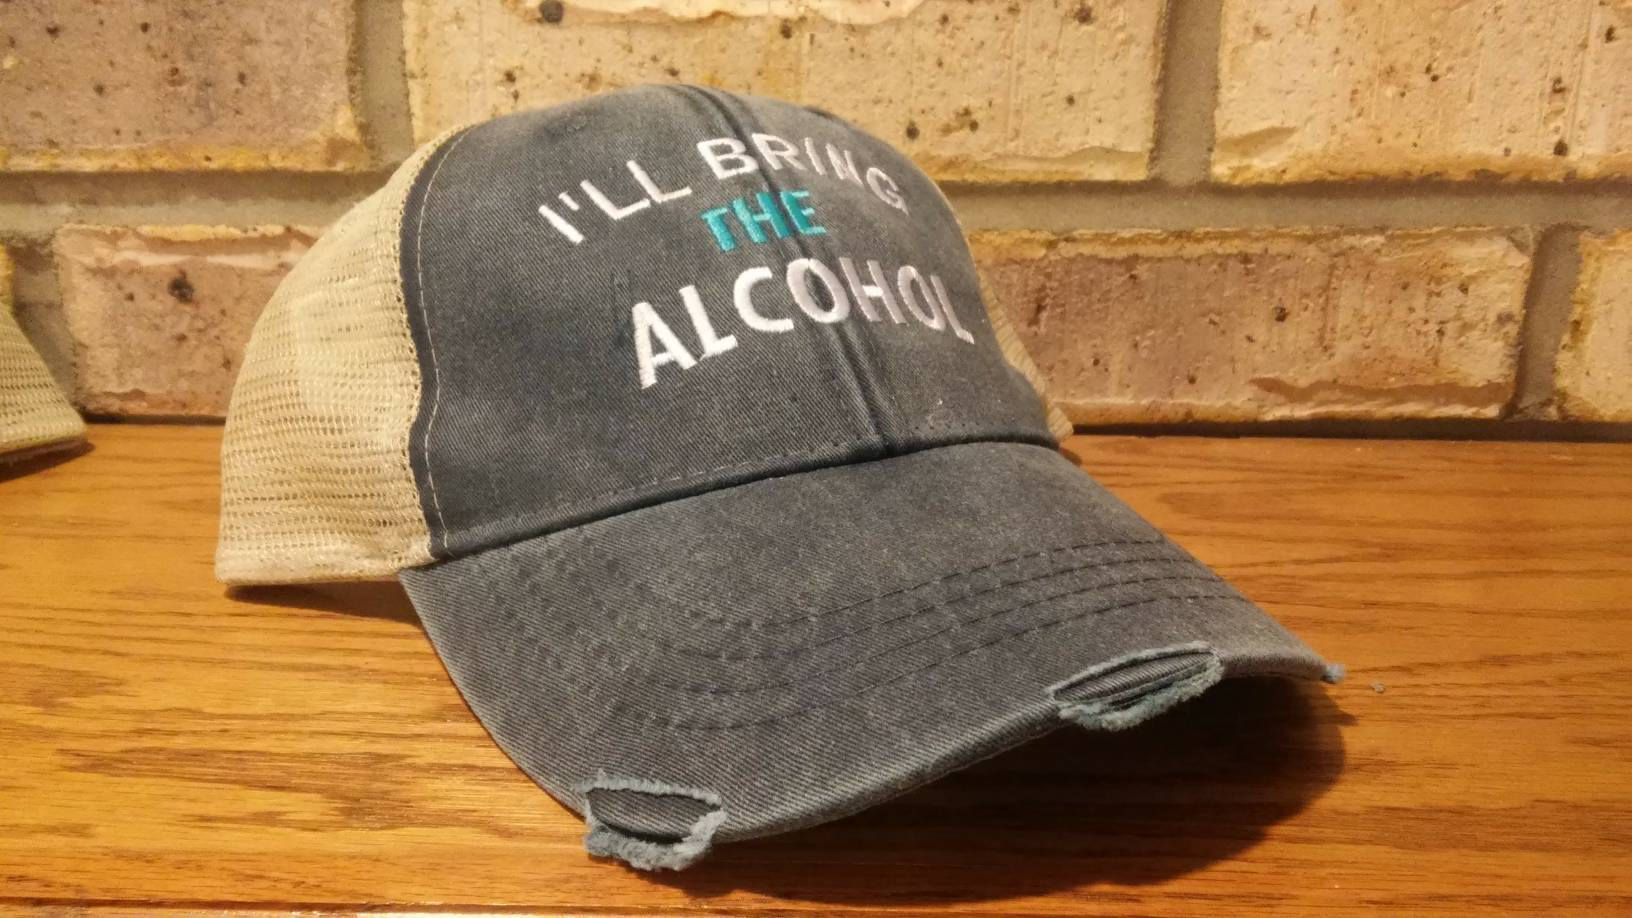 Free Shipping, Set of 2, I'll bring the alcohol, bad decisions trucker hat set, custom girls trip, bff, night out, party drinking hat set